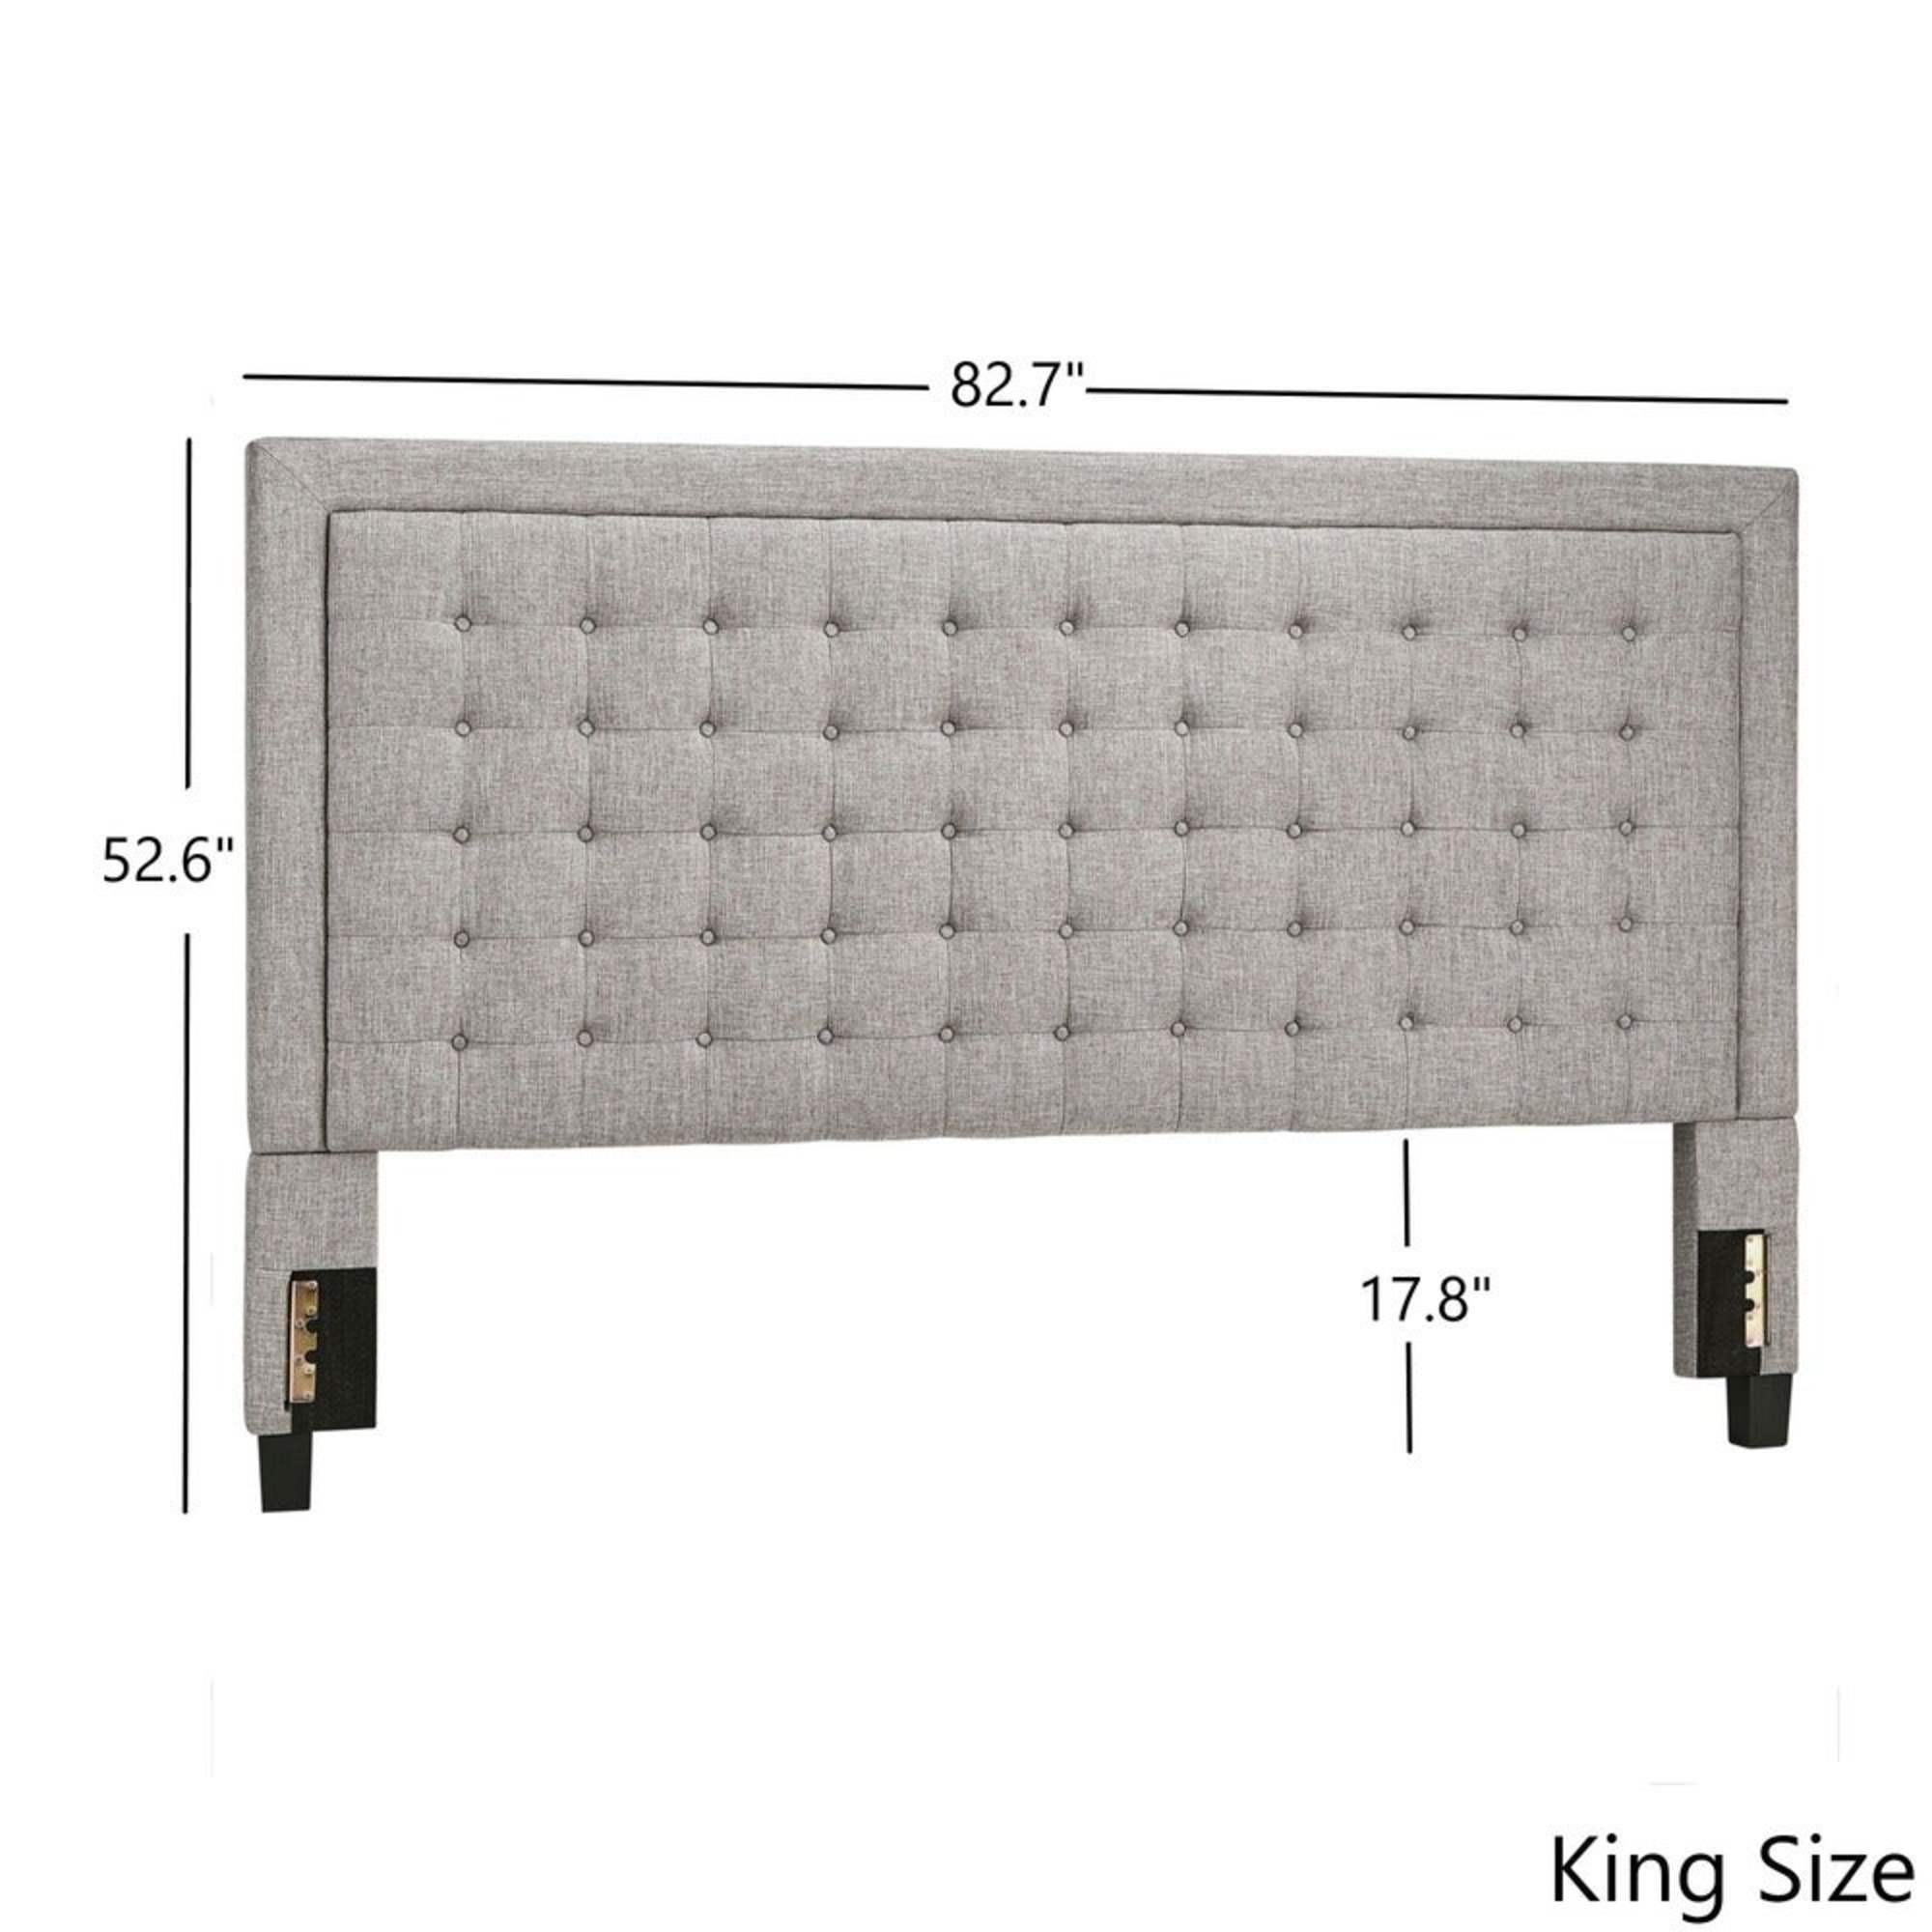 Weston Home Aurelia Square Button-Tufted Upholstered King Headboard, Beige - image 2 of 2